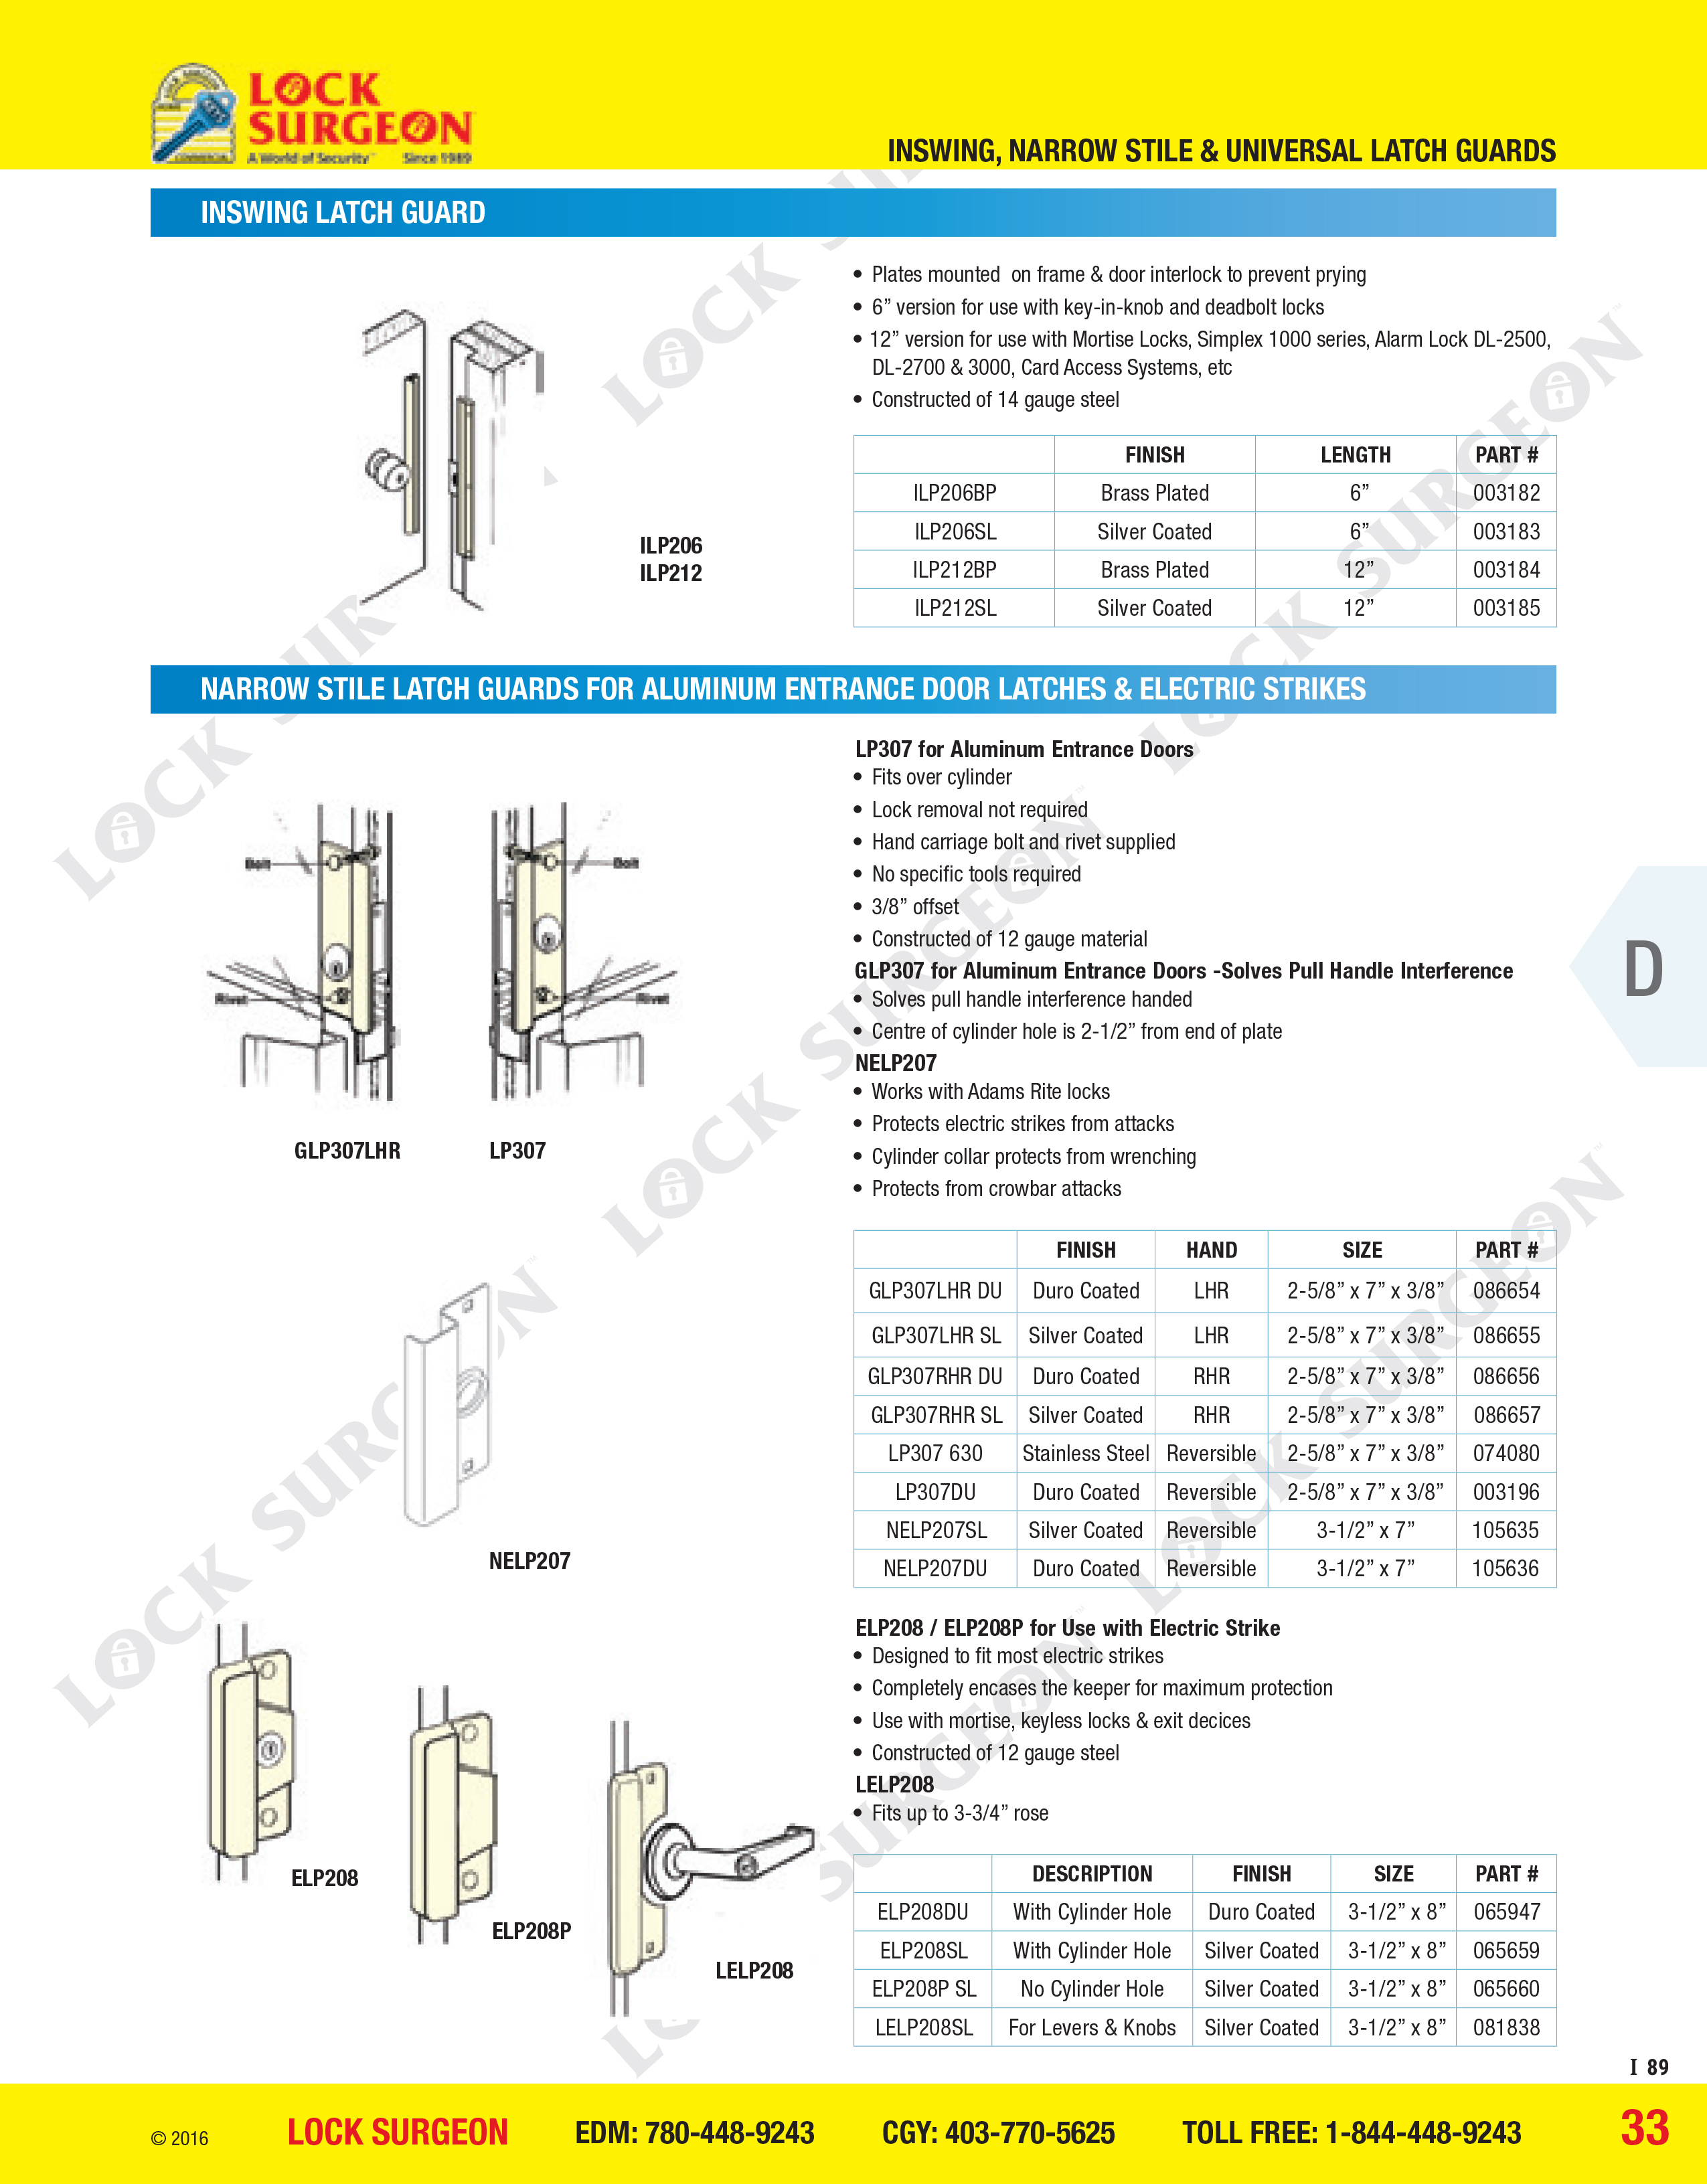 Inswing latch guard narrow stile latch guards for aluminium entrance door latches & electric strikes